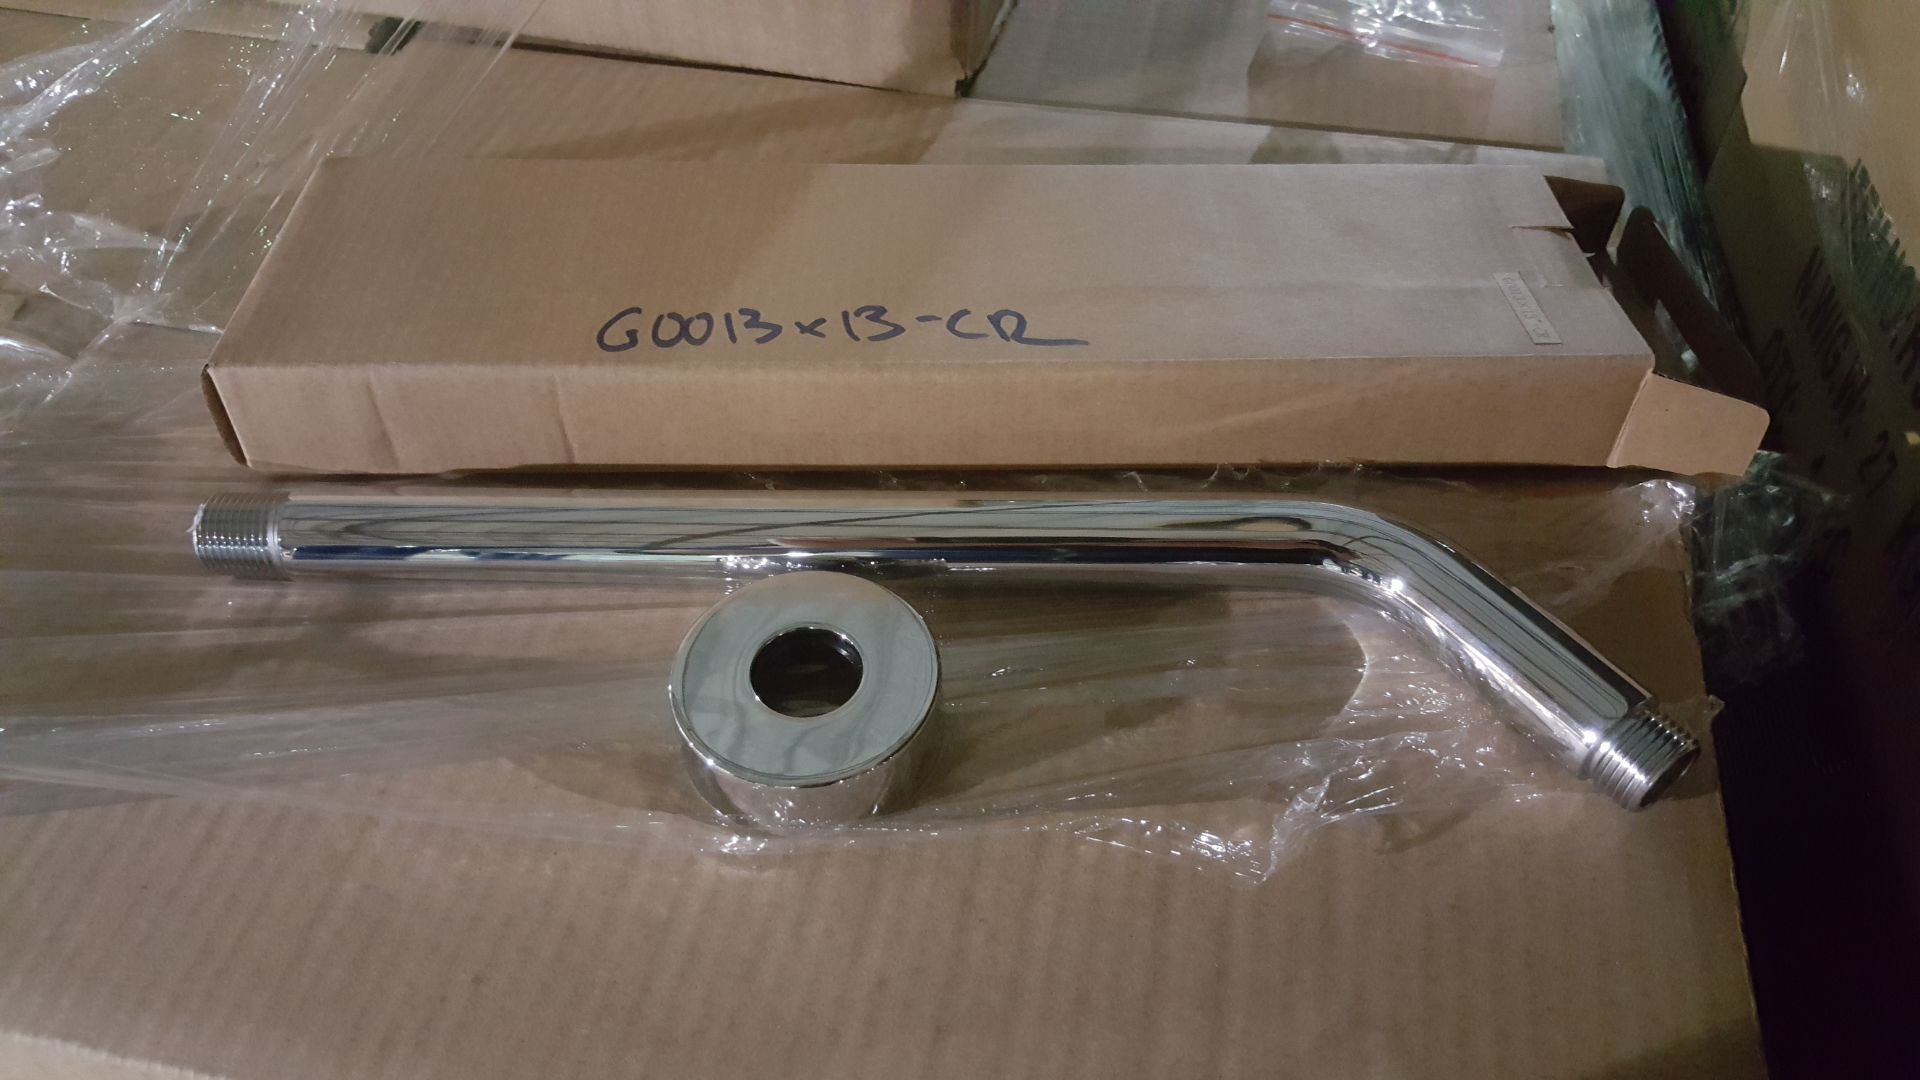 G10013x13CR shower arm with collar - Image 2 of 2